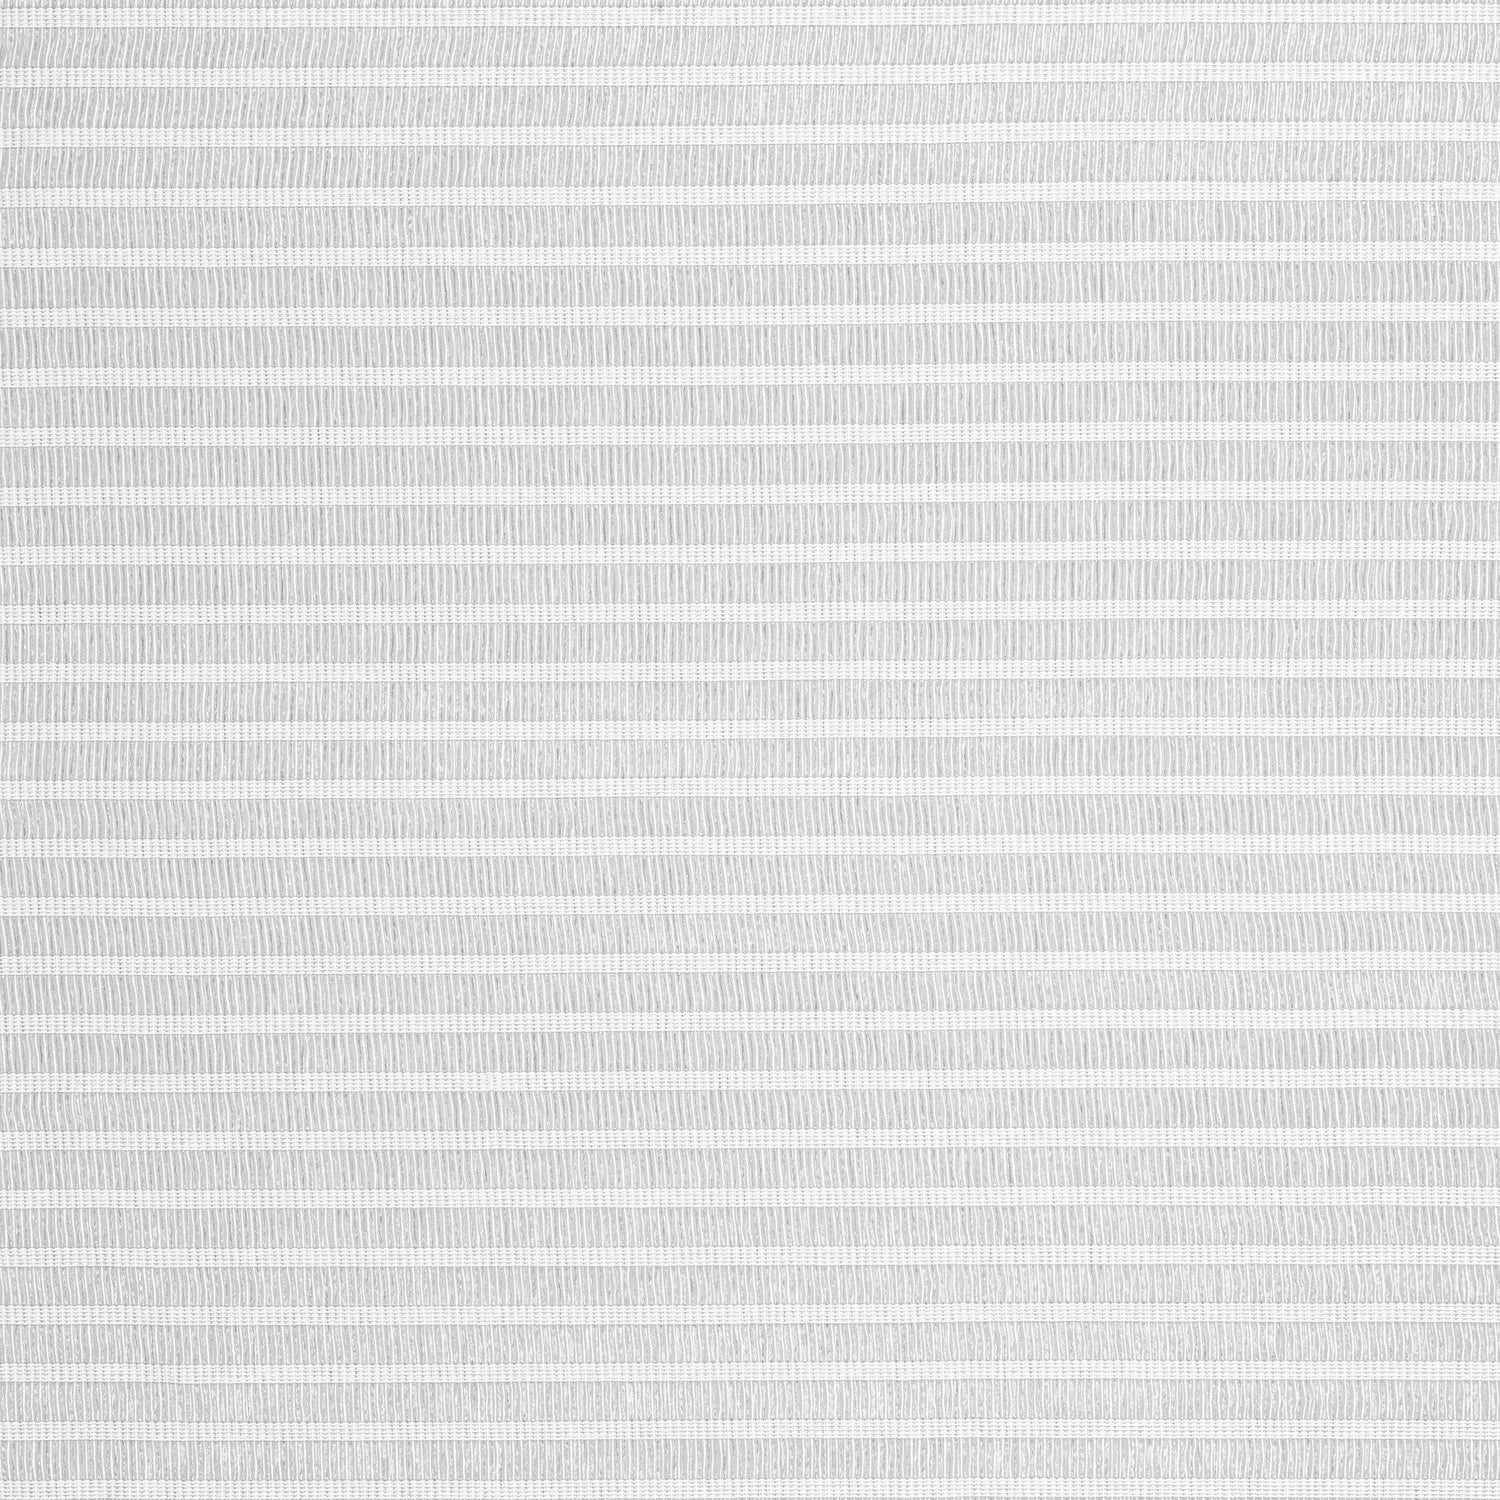 Lanai fabric in sterling color - pattern number FWW8269 - by Thibaut in the Aura collection